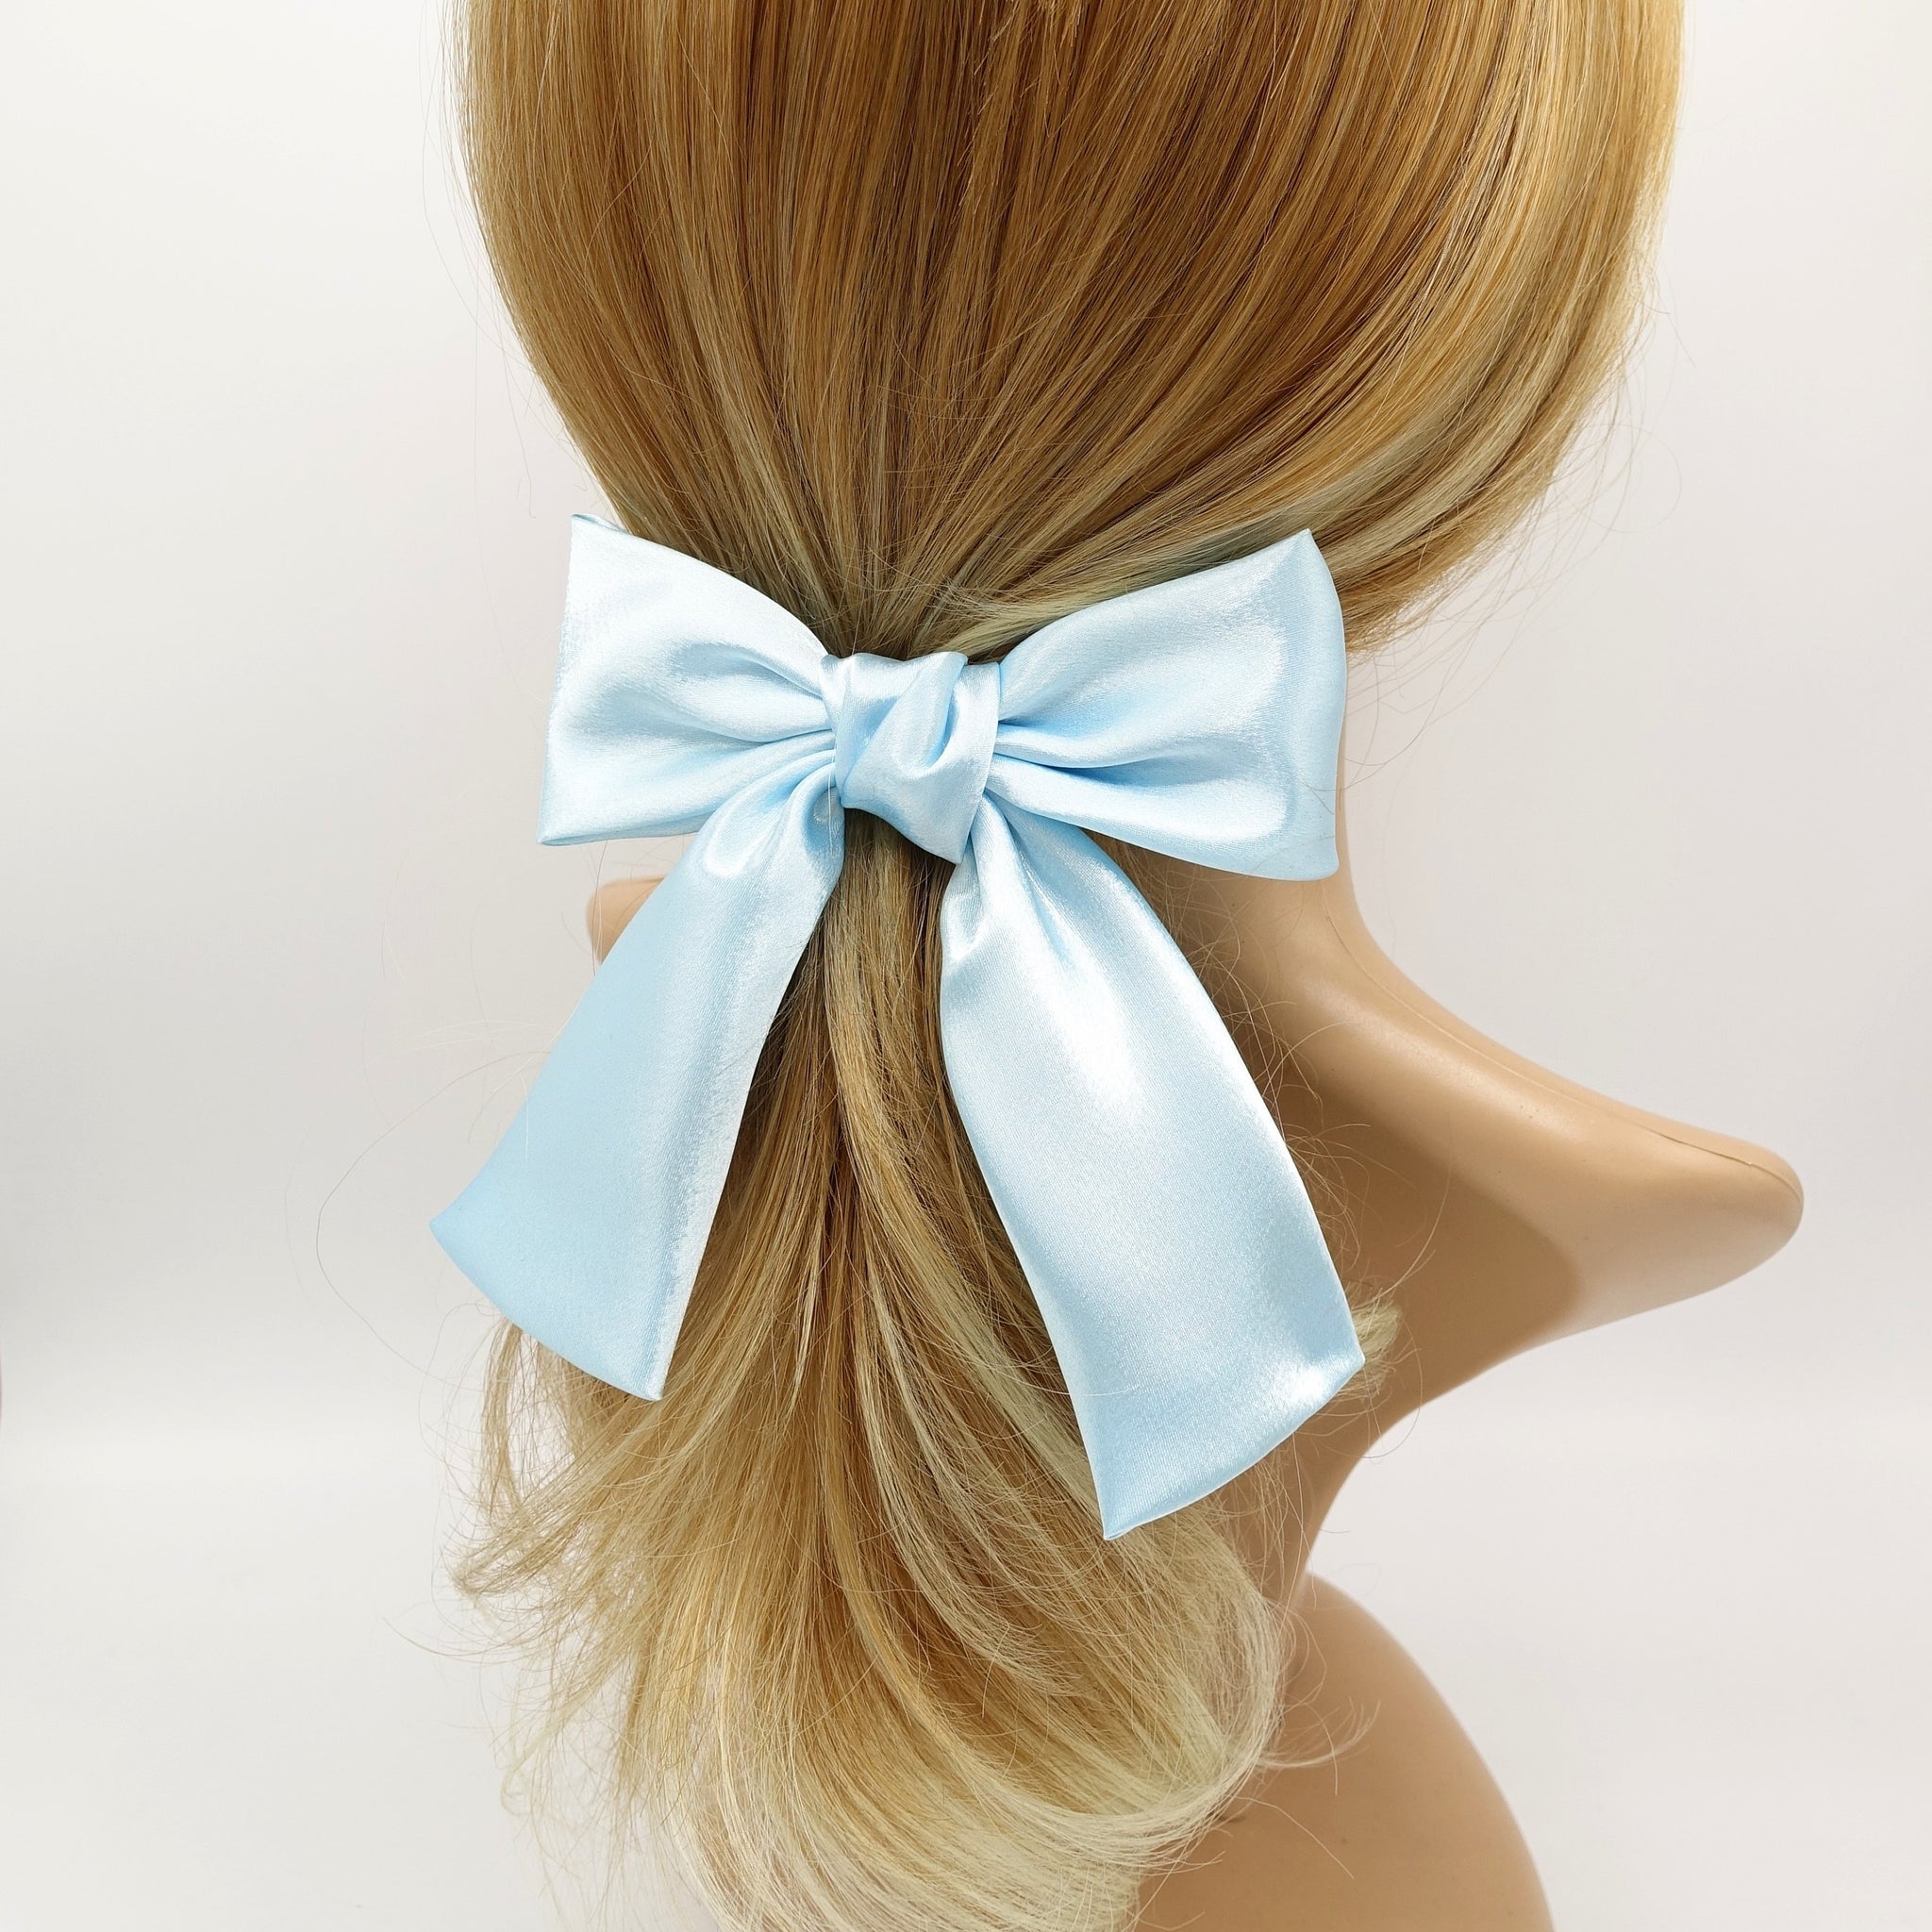 VeryShine glossy satin tail hair bow in regular size hair accessory for women